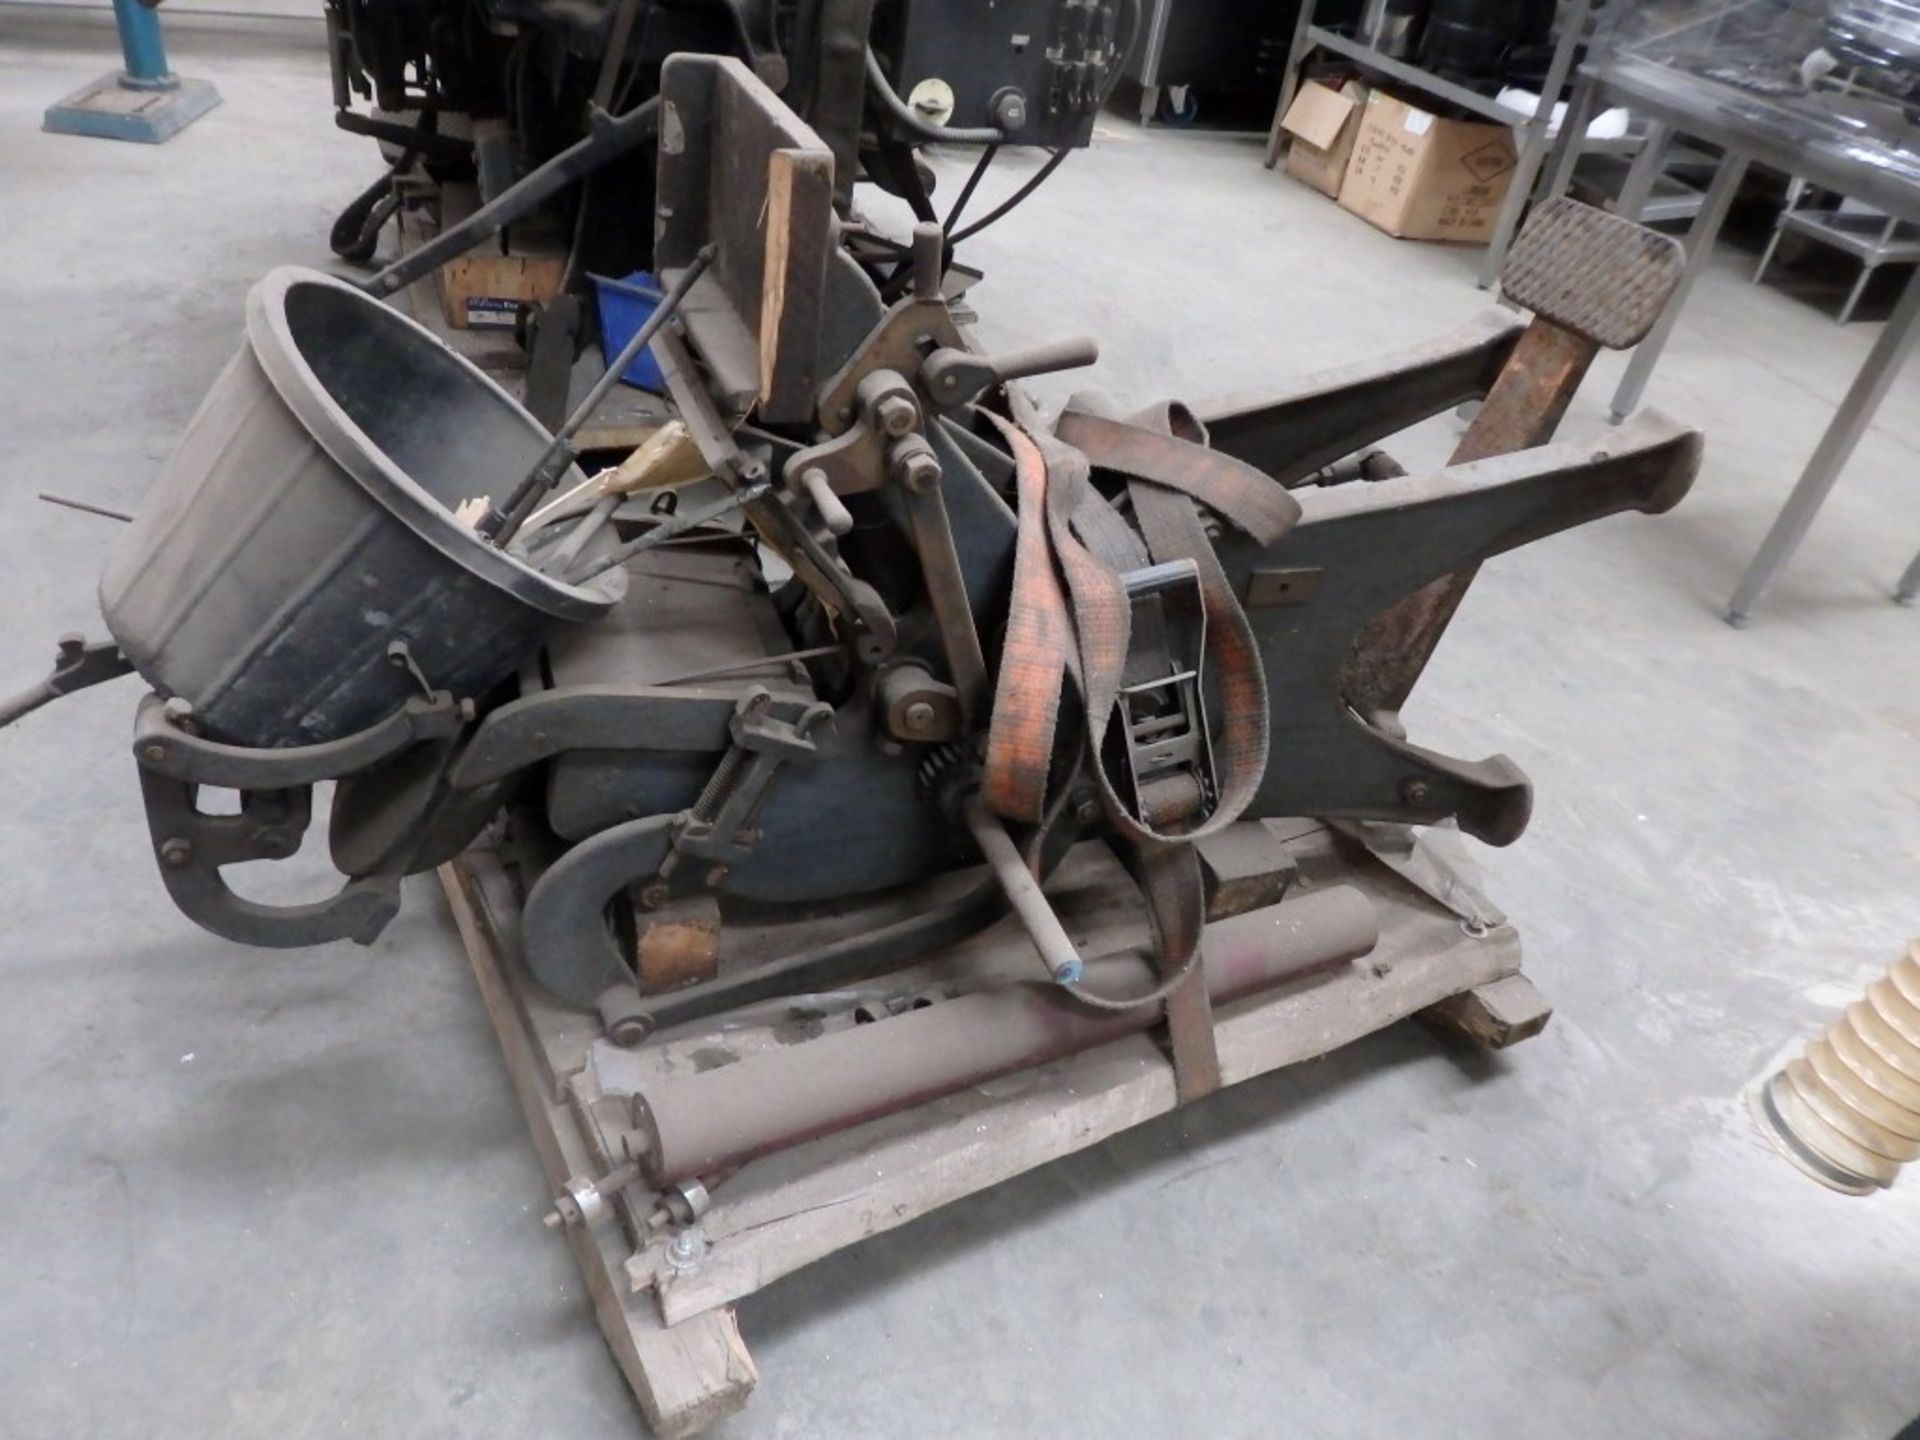 1 x Original Linotype Model 78 Printing Press - Untested In Good Aesthetic Condition - Fantastic - Image 4 of 23